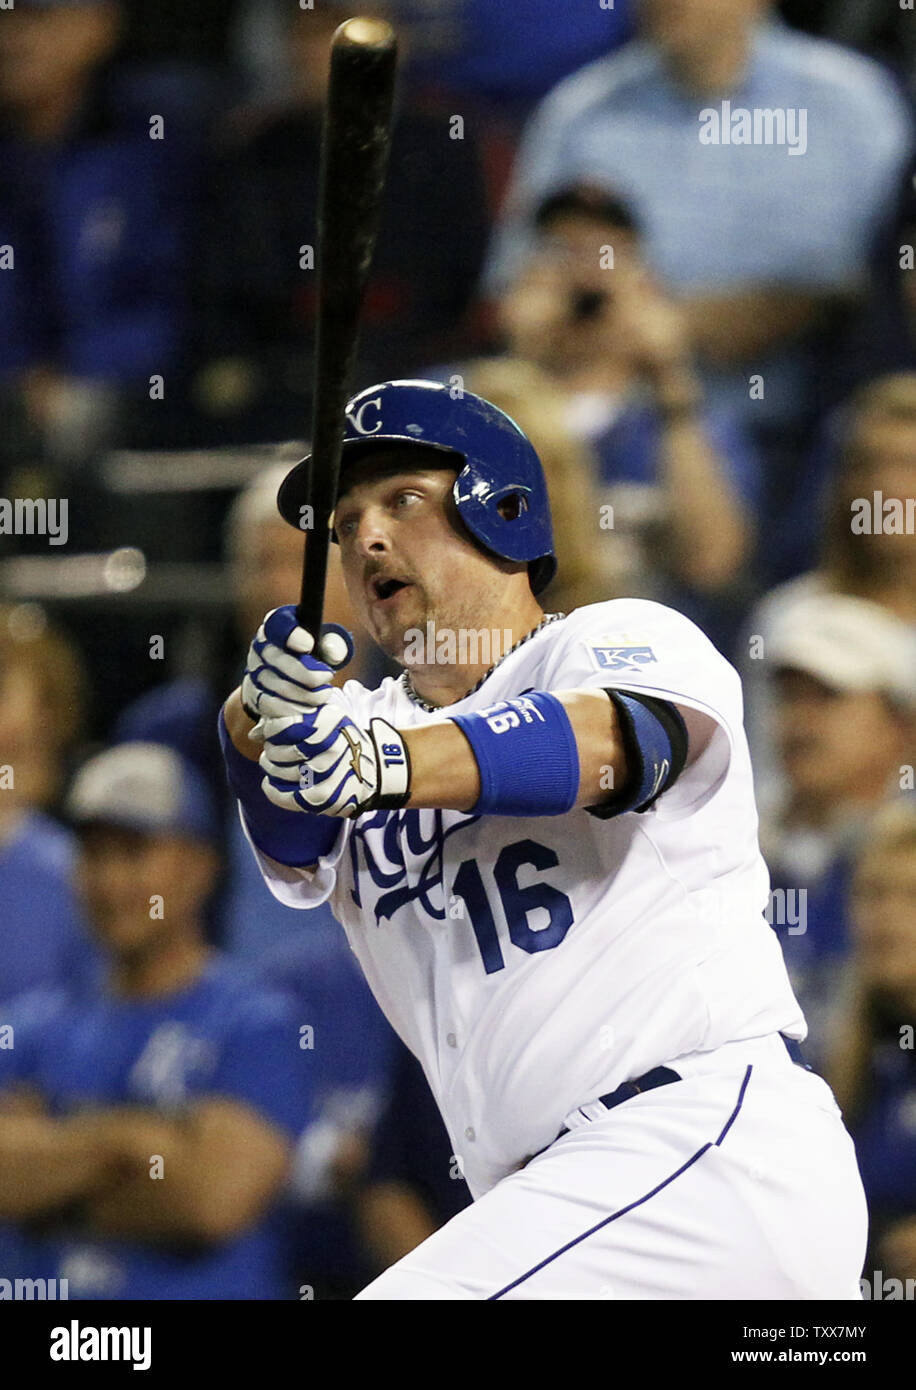 Kansas City Royals DH Billy Butler singles in teammate Lorenzo Cain against the San Francisco Giants during the first inning of game 2 of the World Series at Kaufman Stadium in Kansas City, Missouri on October 22, 2014. San Francisco leads the series 1-0 over Kansas City.   UPI/Jeff Moffett Stock Photo